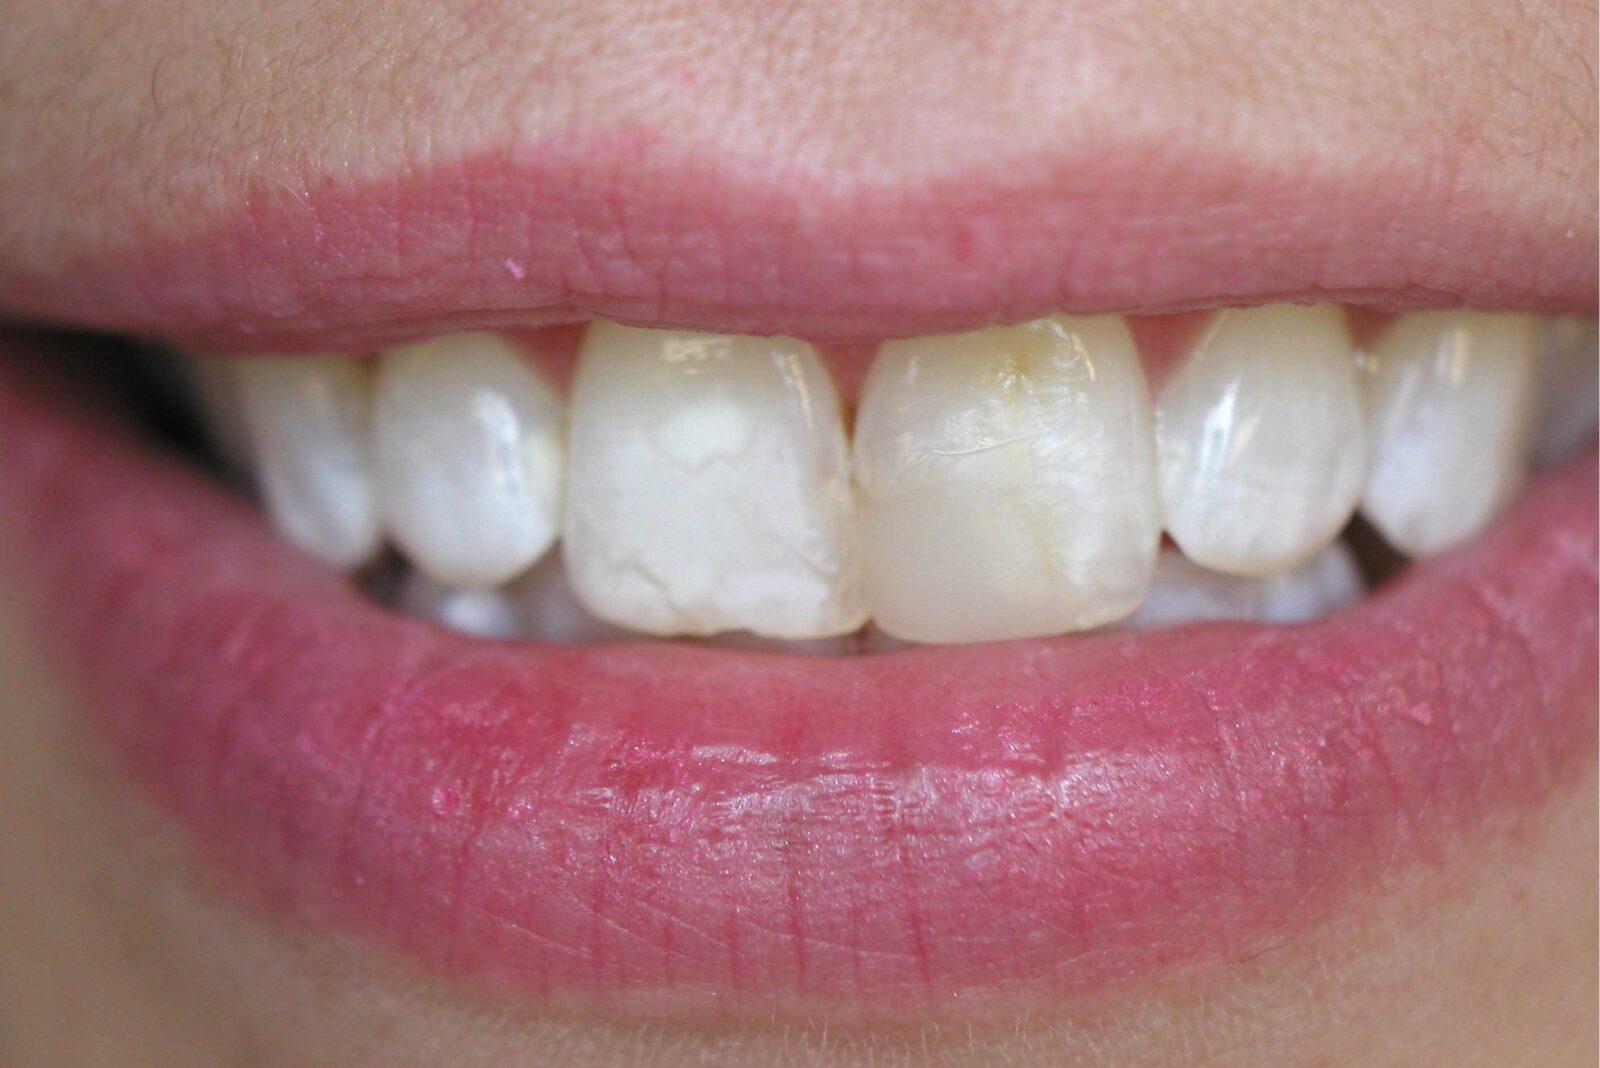 Client's teeth before treatment